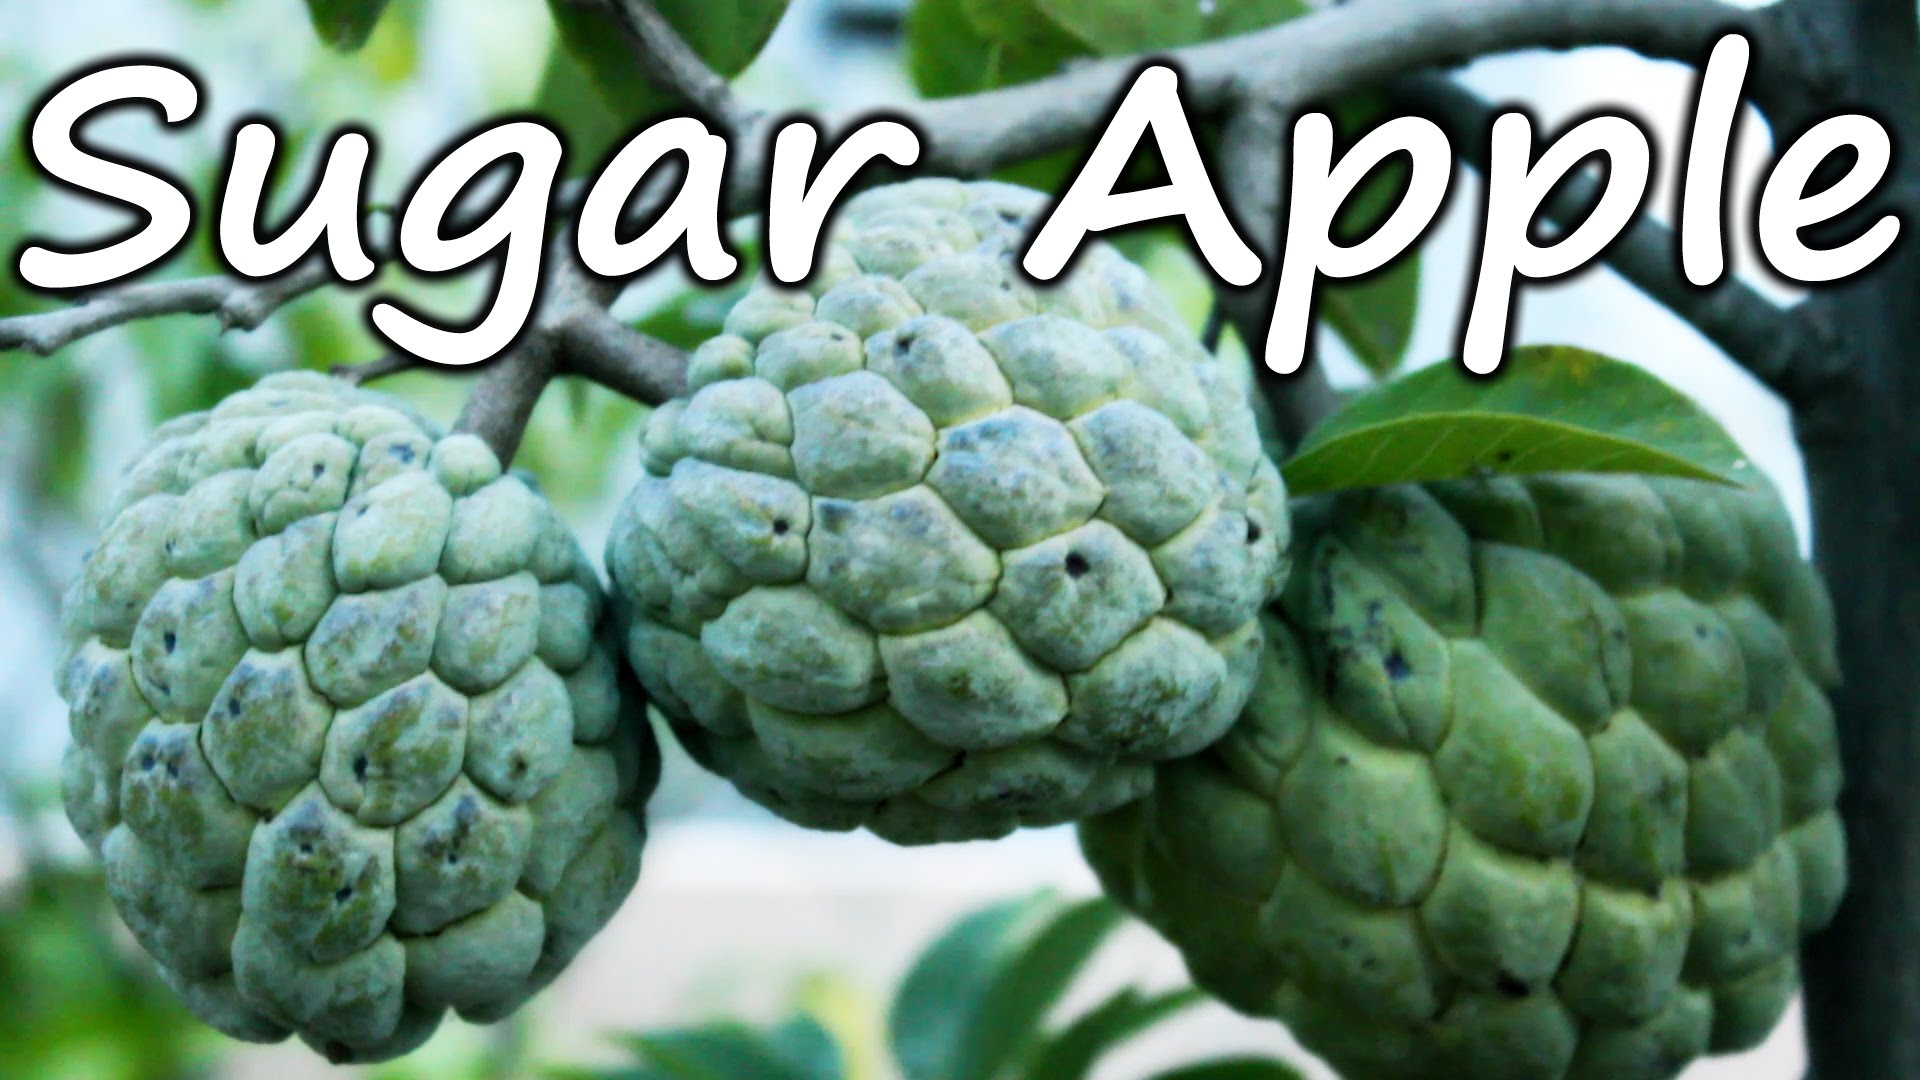 Growing Sugar Apple (Sweetsop) in a Container - Terrace Garden - YouTube